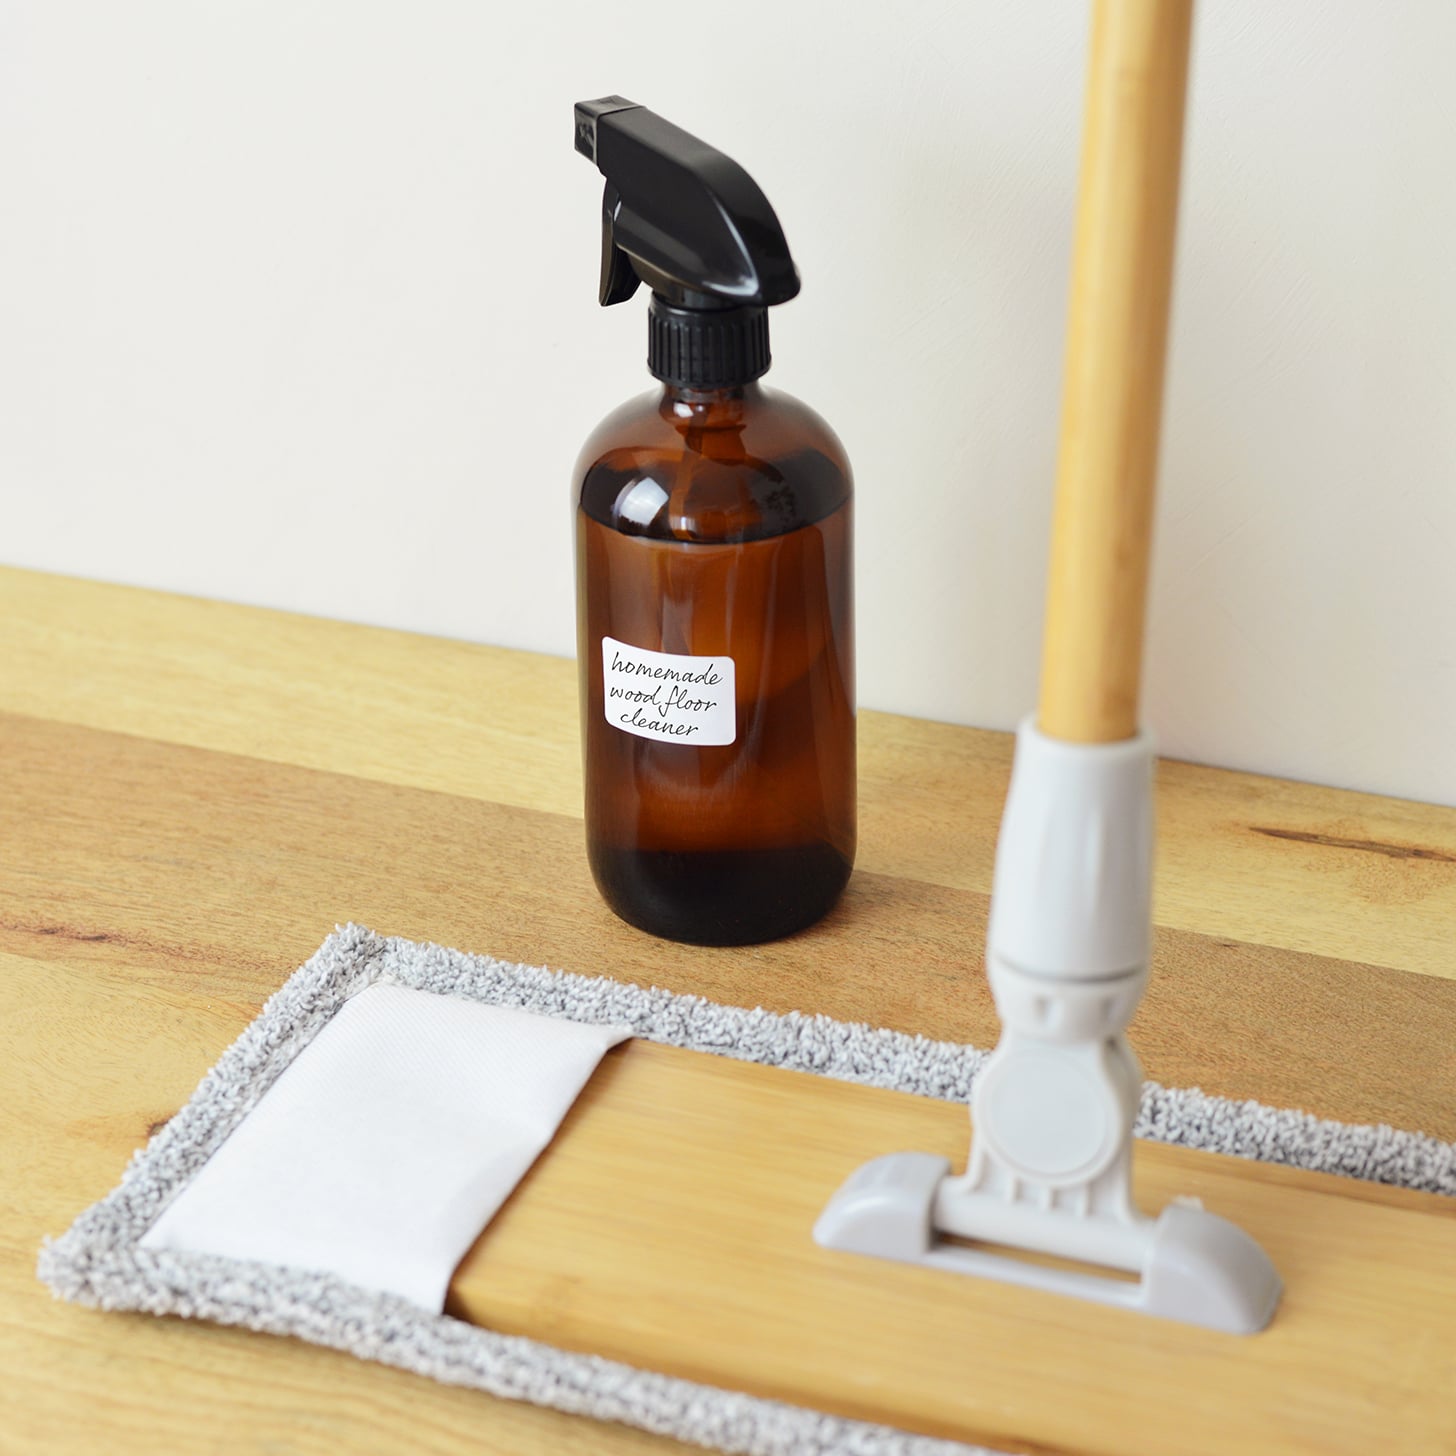 How To Safely Clean Hardwood Floors With a DIY Floor Cleaner